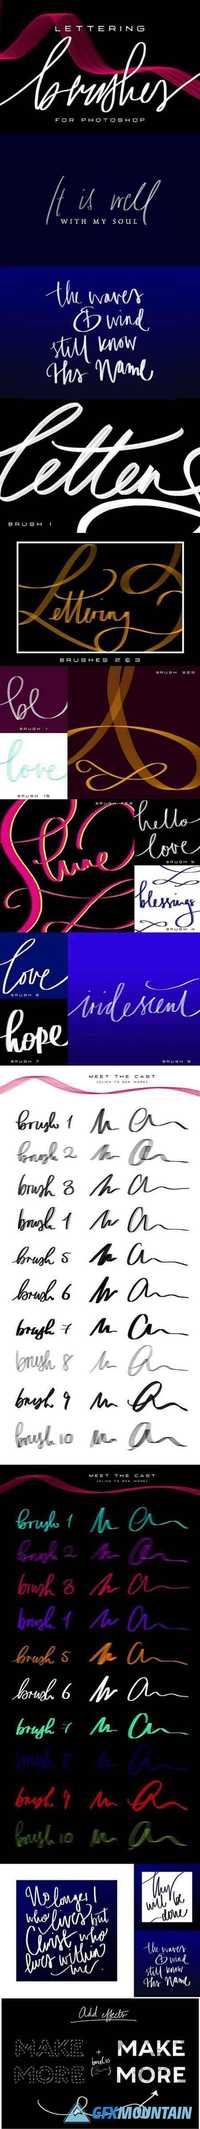 Lettering Brushes For Photoshop 1288172